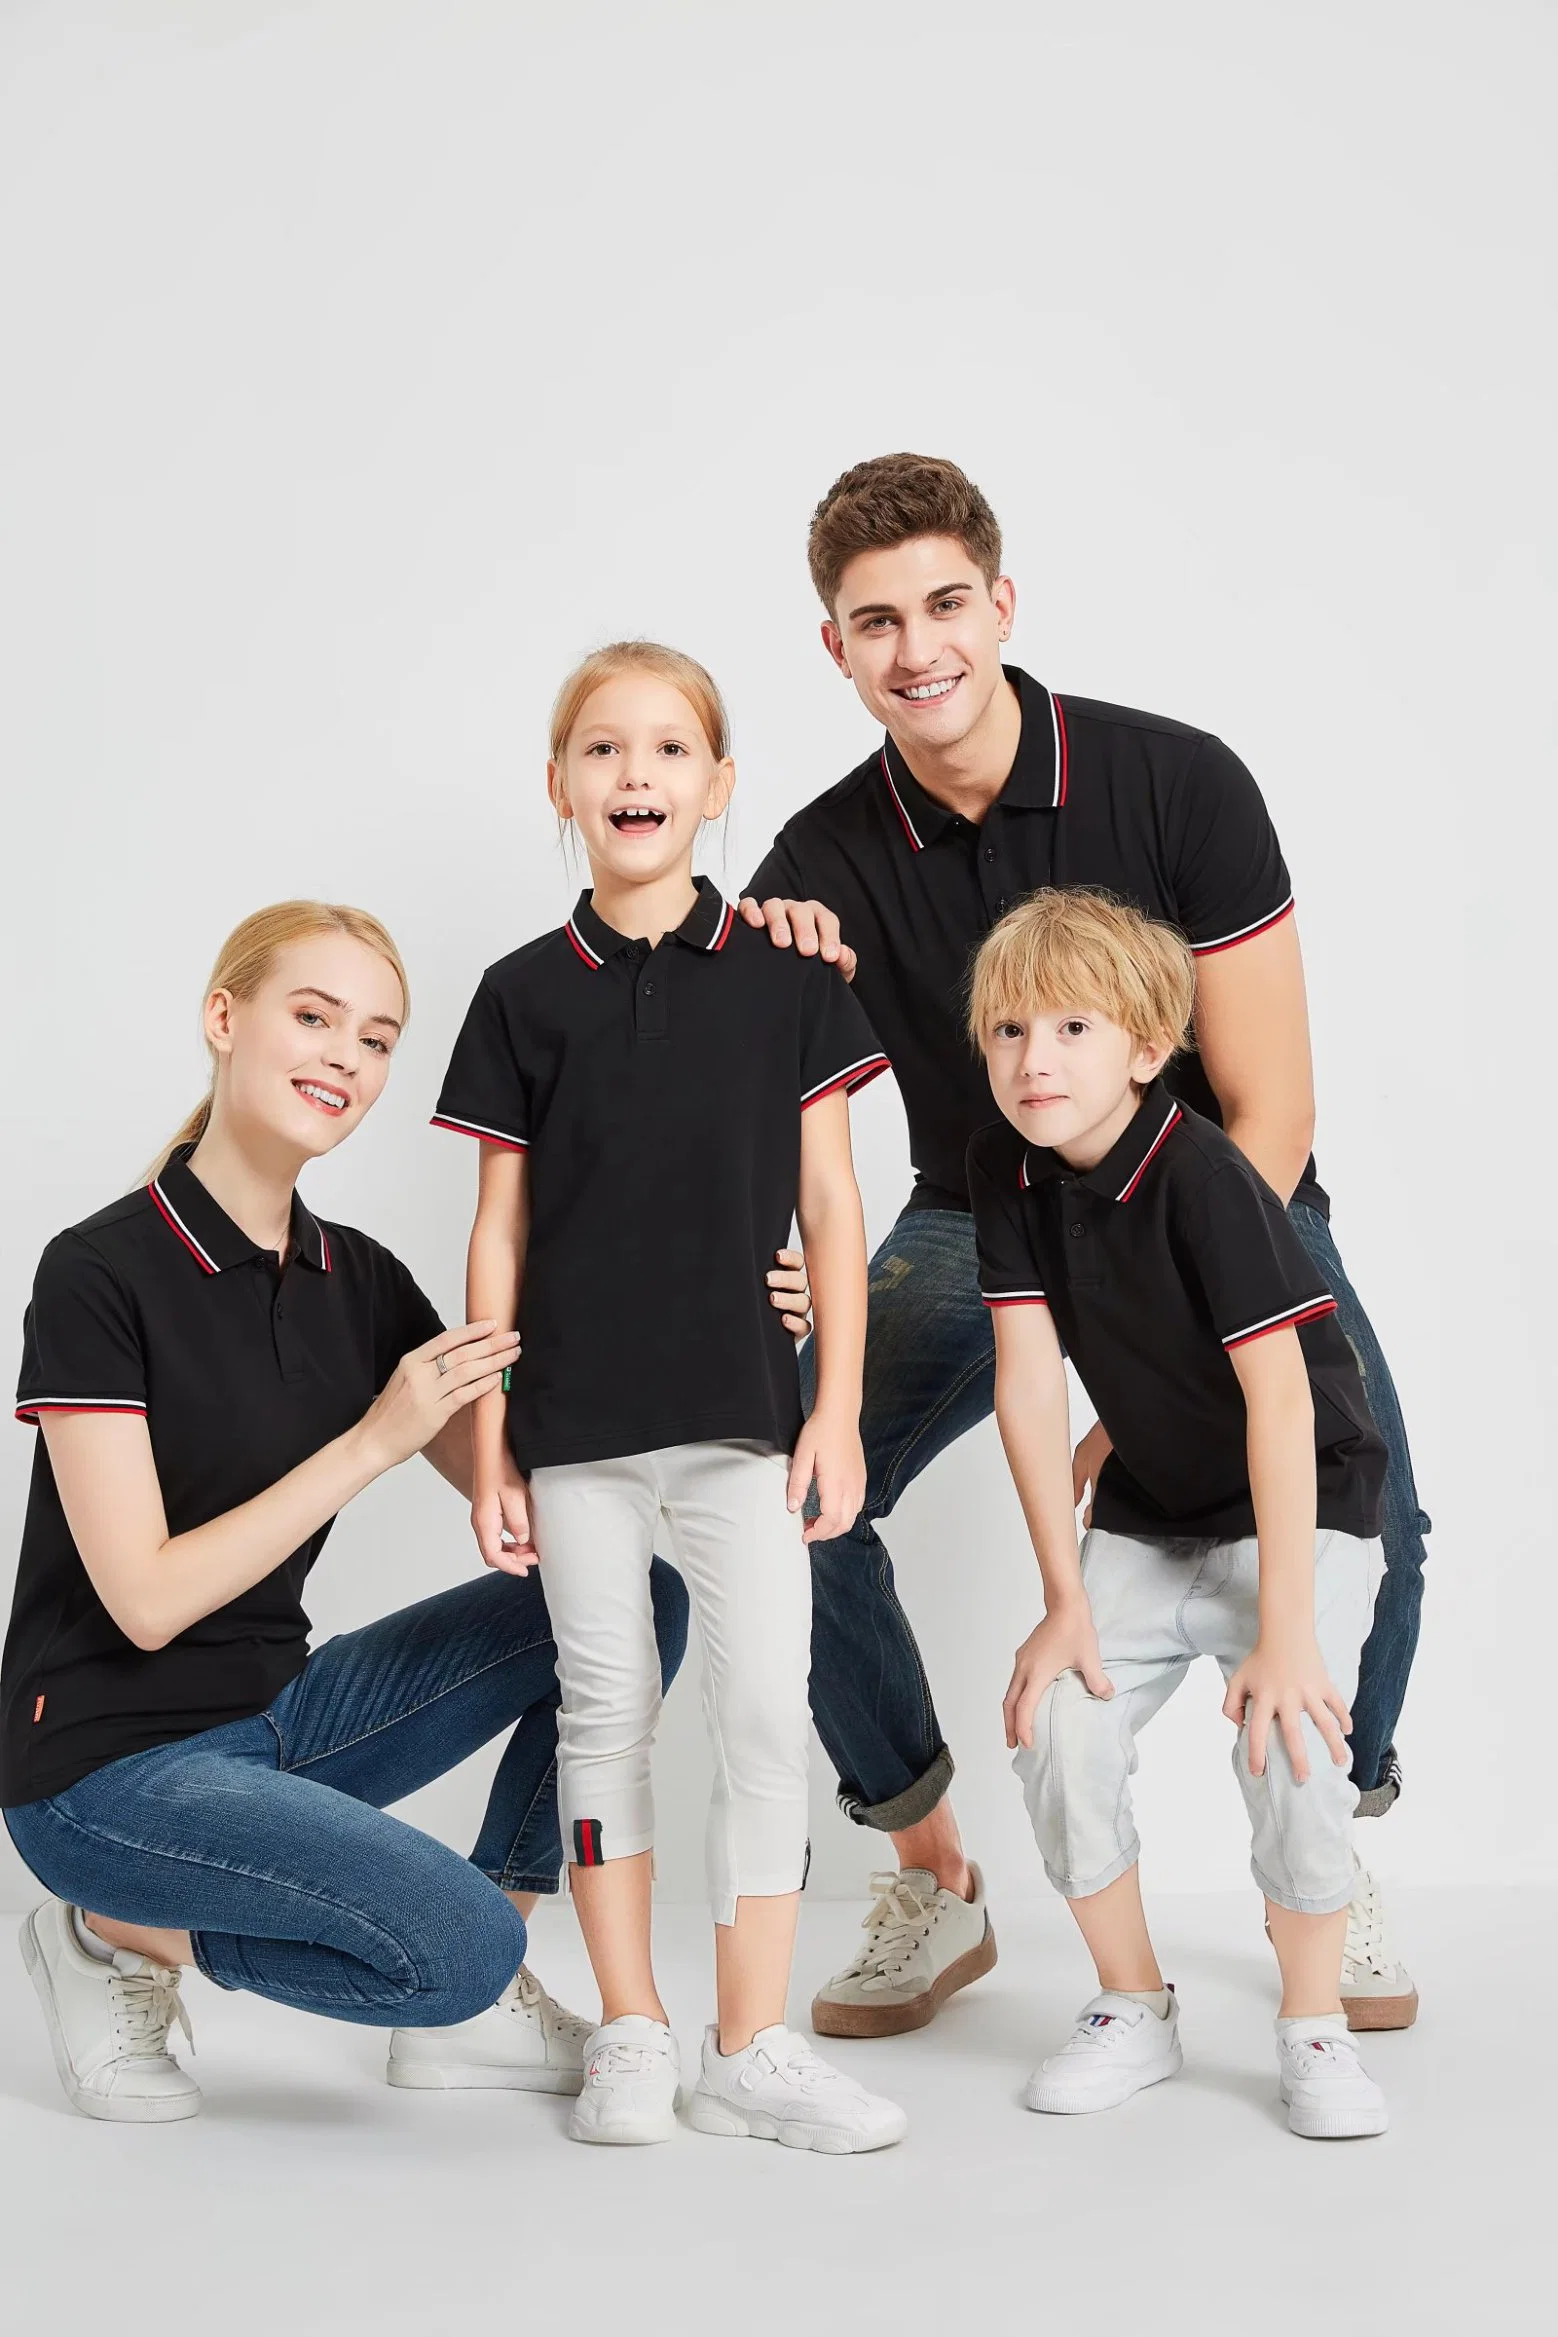 Top Quality Soft Cotton T-Shirts Golf Travel Family Mommy, Daddy and Children Polo Shirts